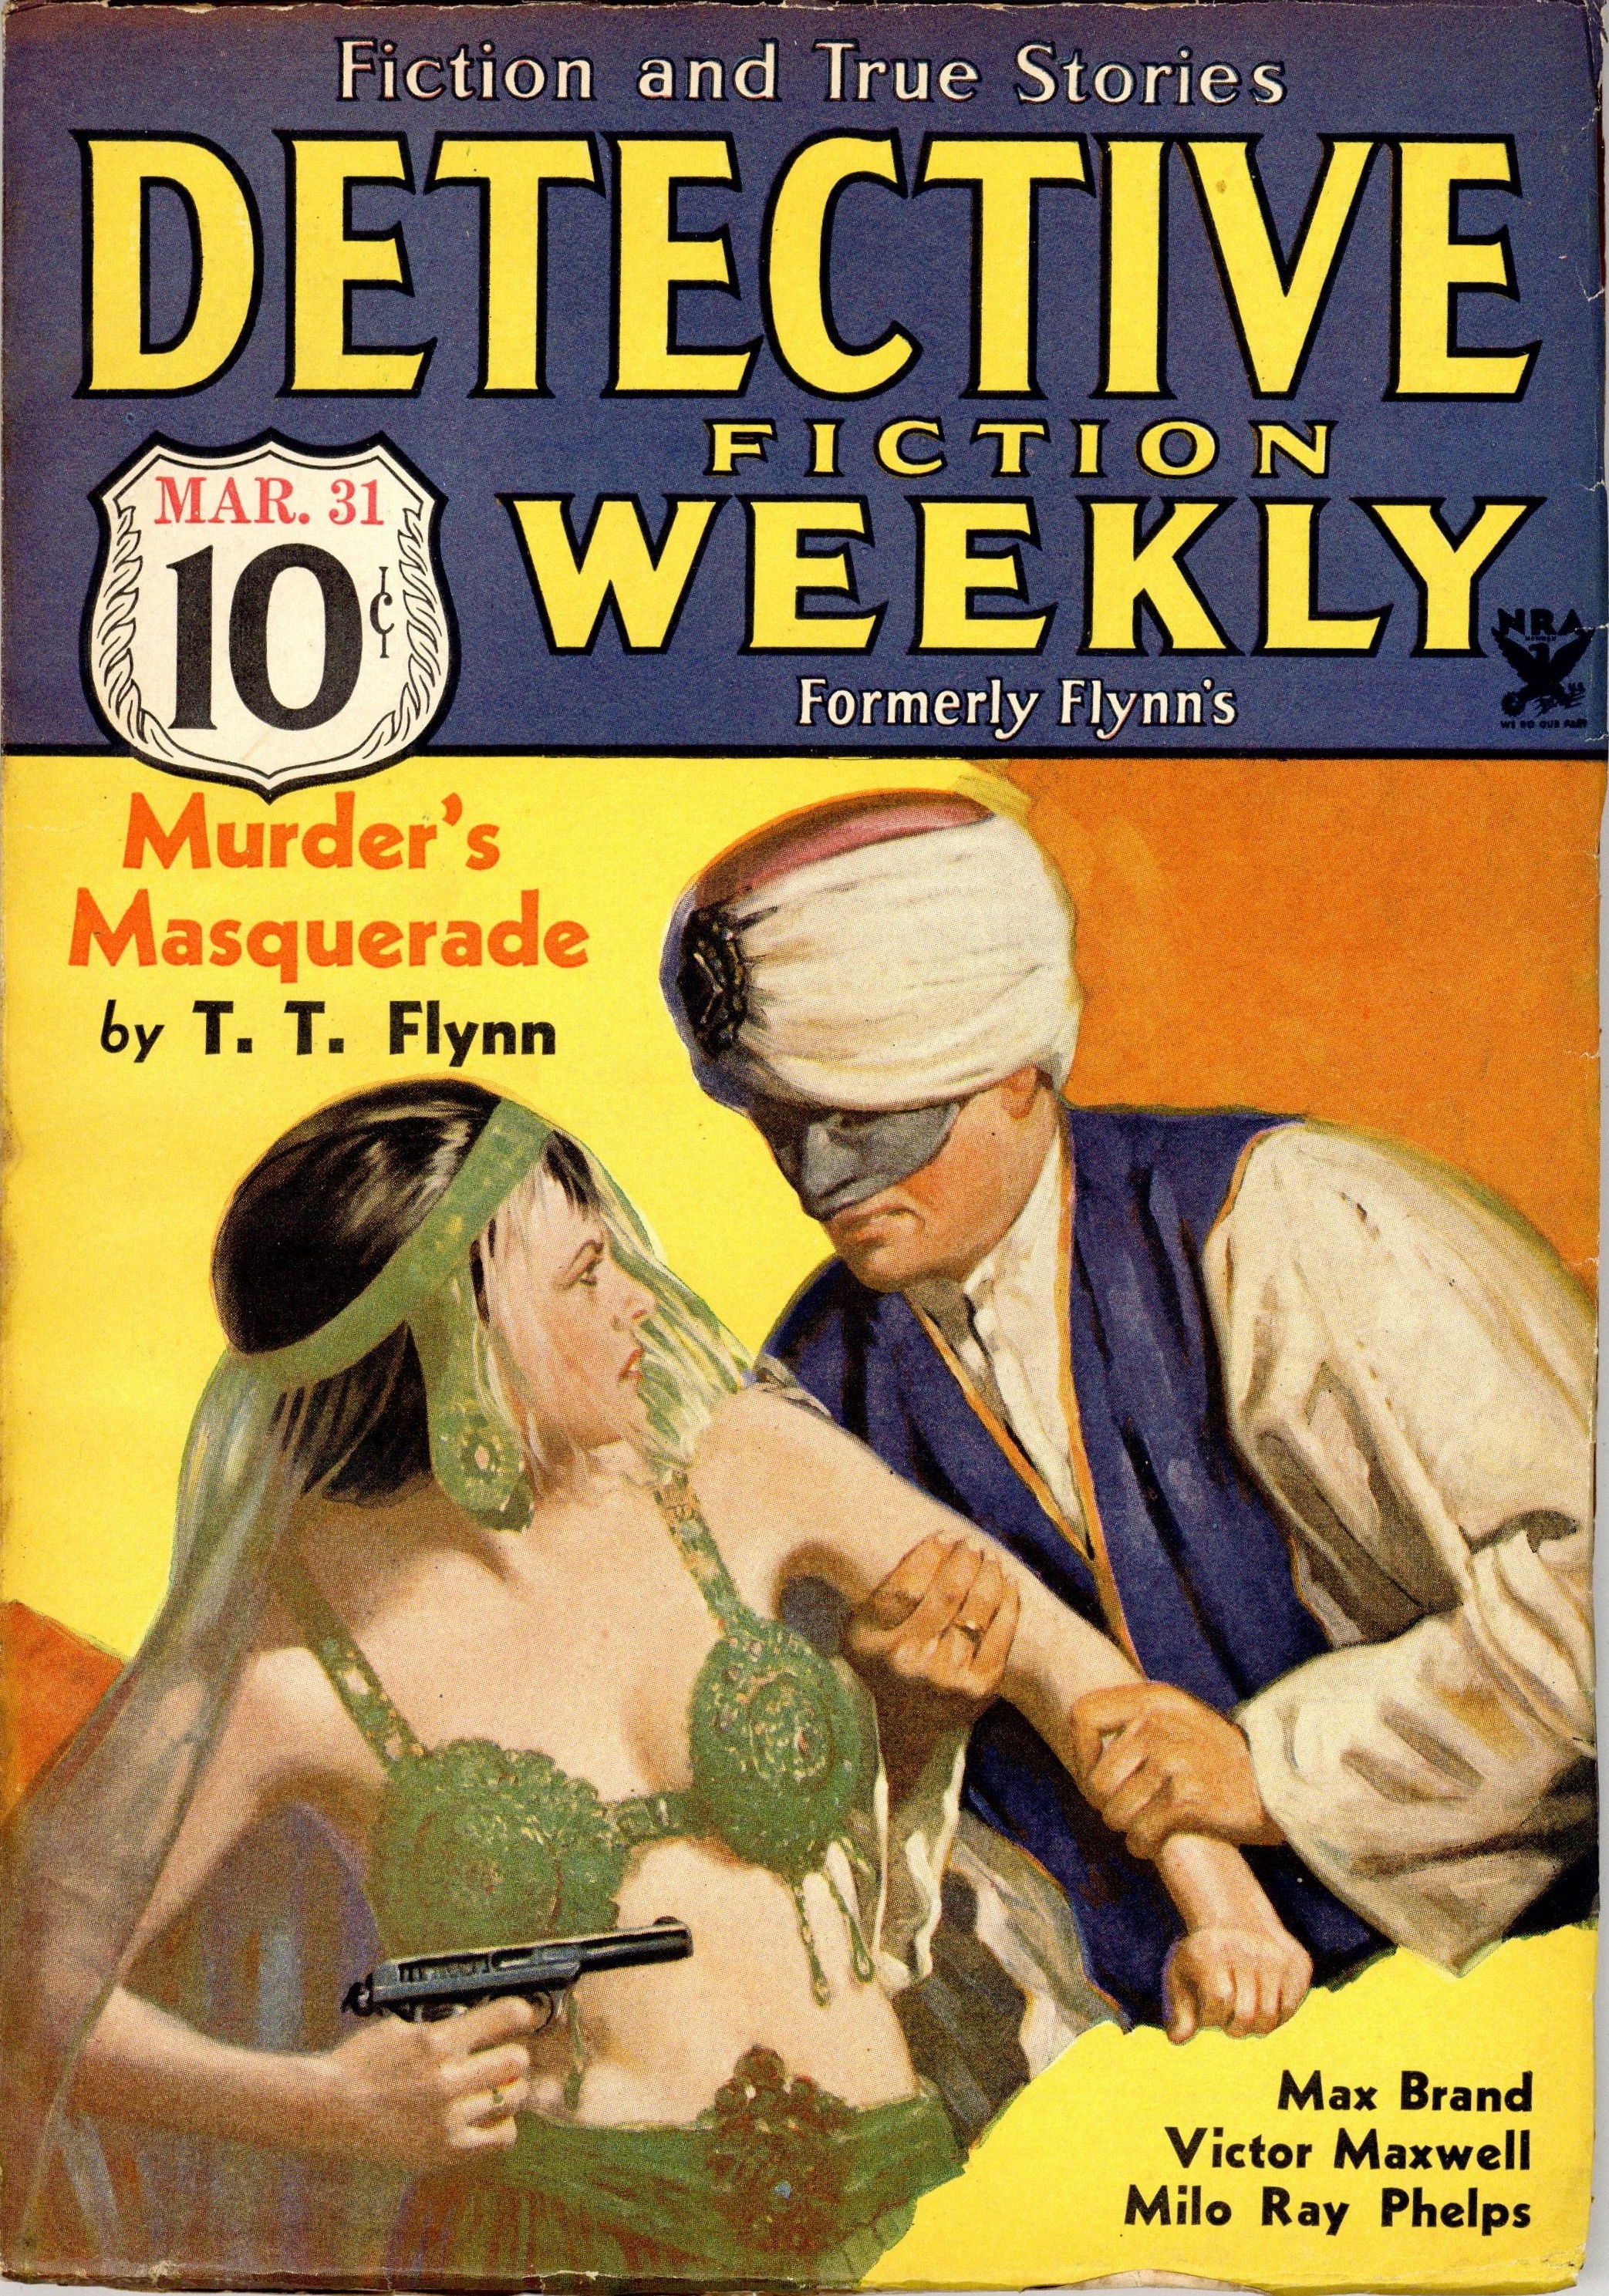 Detective Fiction Weekly March 10th 1934